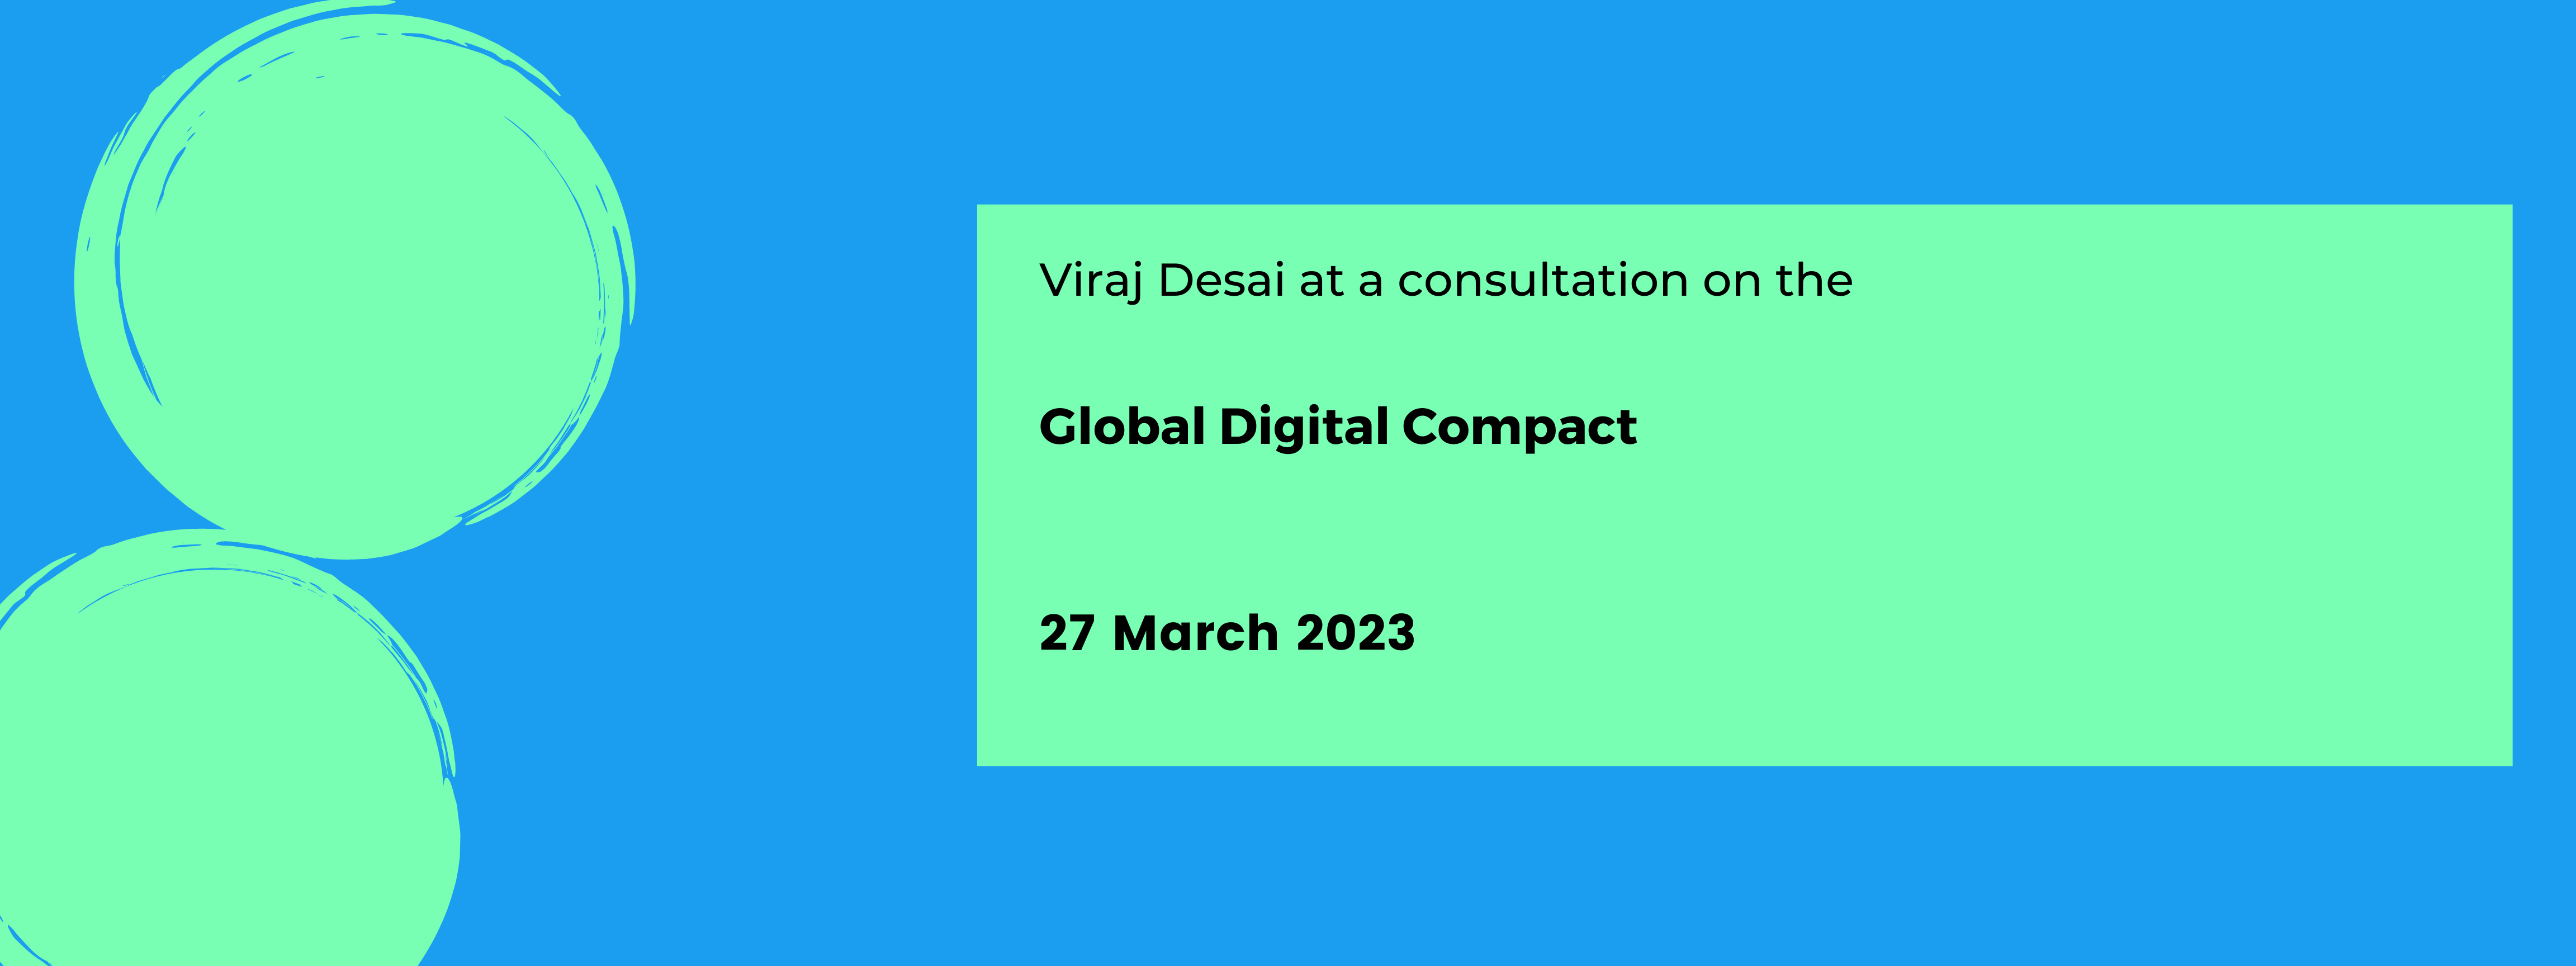  Consultation on the Global Digital Compact